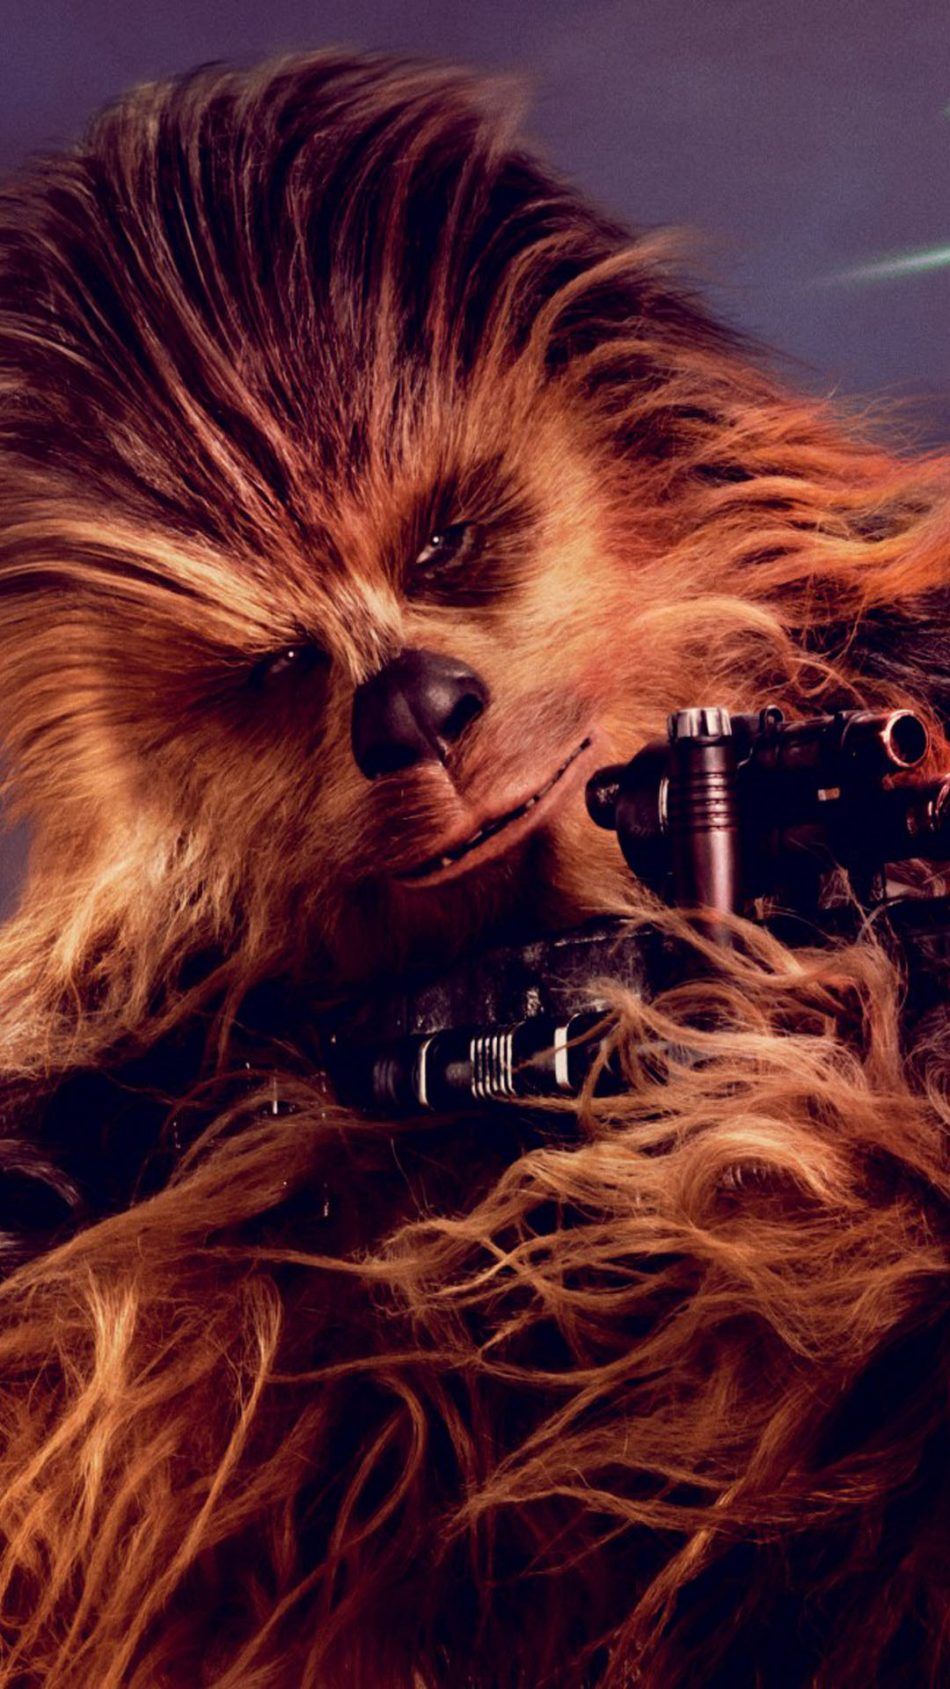 Chewbacca In Solo A Star Wars Story HD Mobile Wallpaper Wars Chewbacca HD Wallpaper